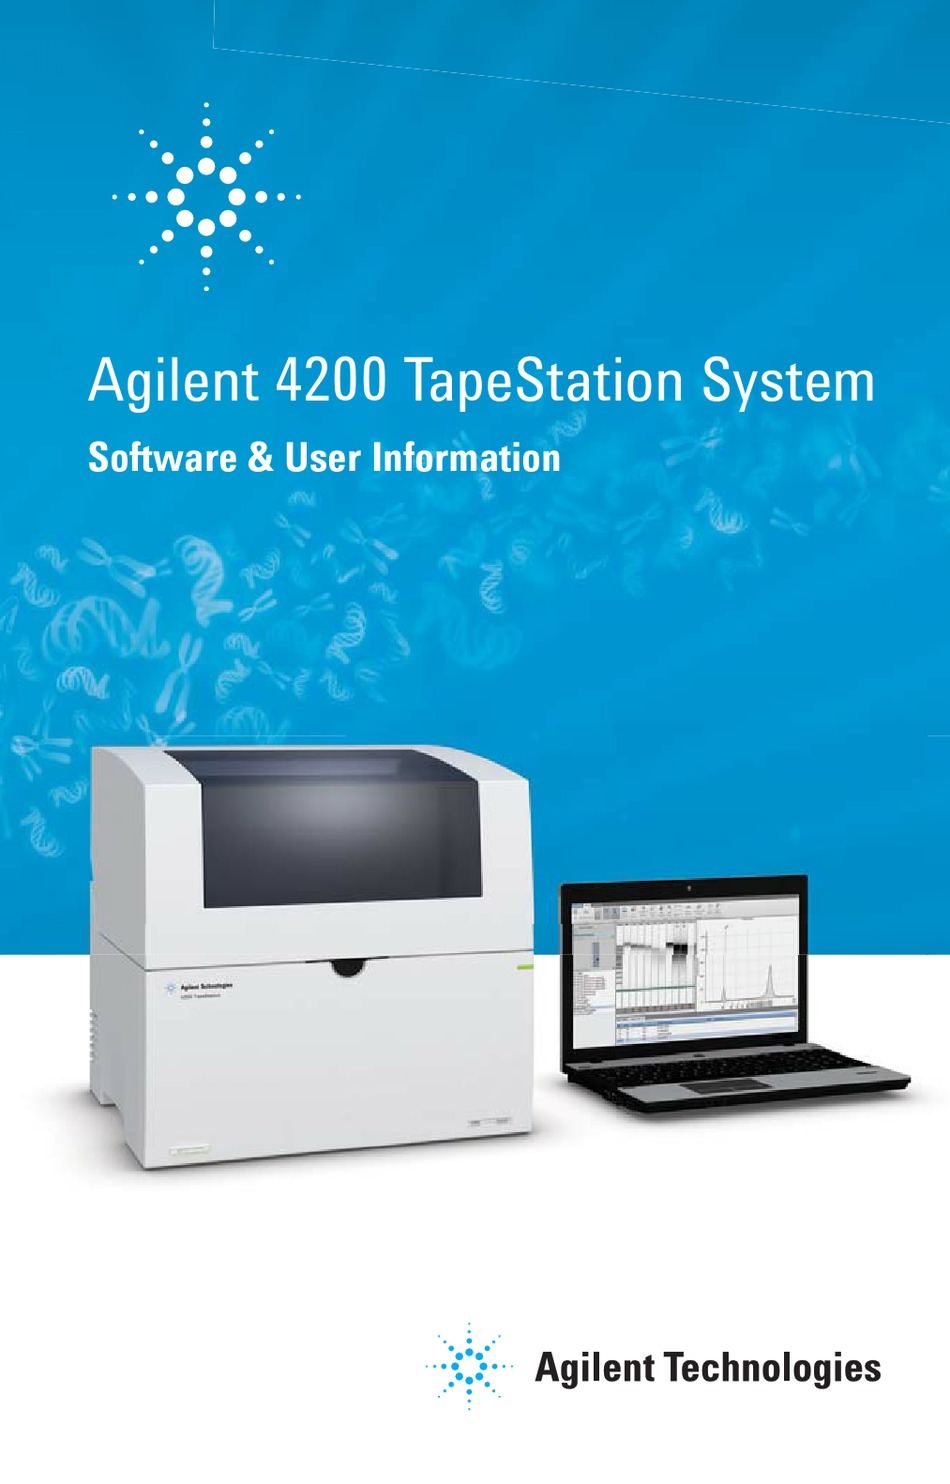 agilent tapestation analysis software download